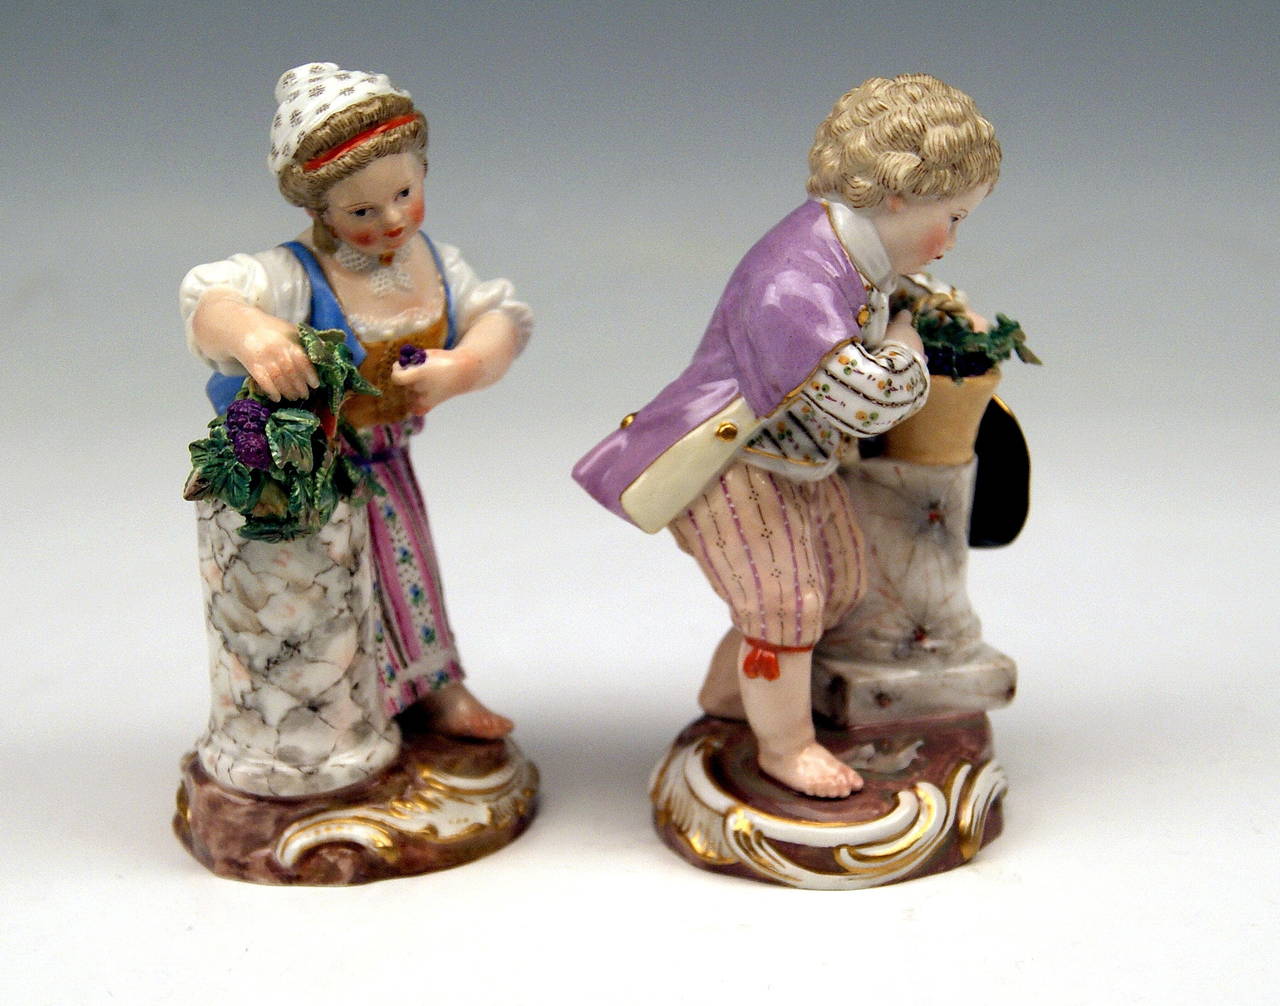 Meissen Lovely Pair of Children Season's Rococo Figurines - The Fall:
Girl and Boy with Wine Grapes, both supporting themselves on marble column
   
MANUFACTORY:  MEISSEN

DATING:   19th century / made  circa 1870
MATERIAL:  WHITE PORCELAIN, GLOSSY